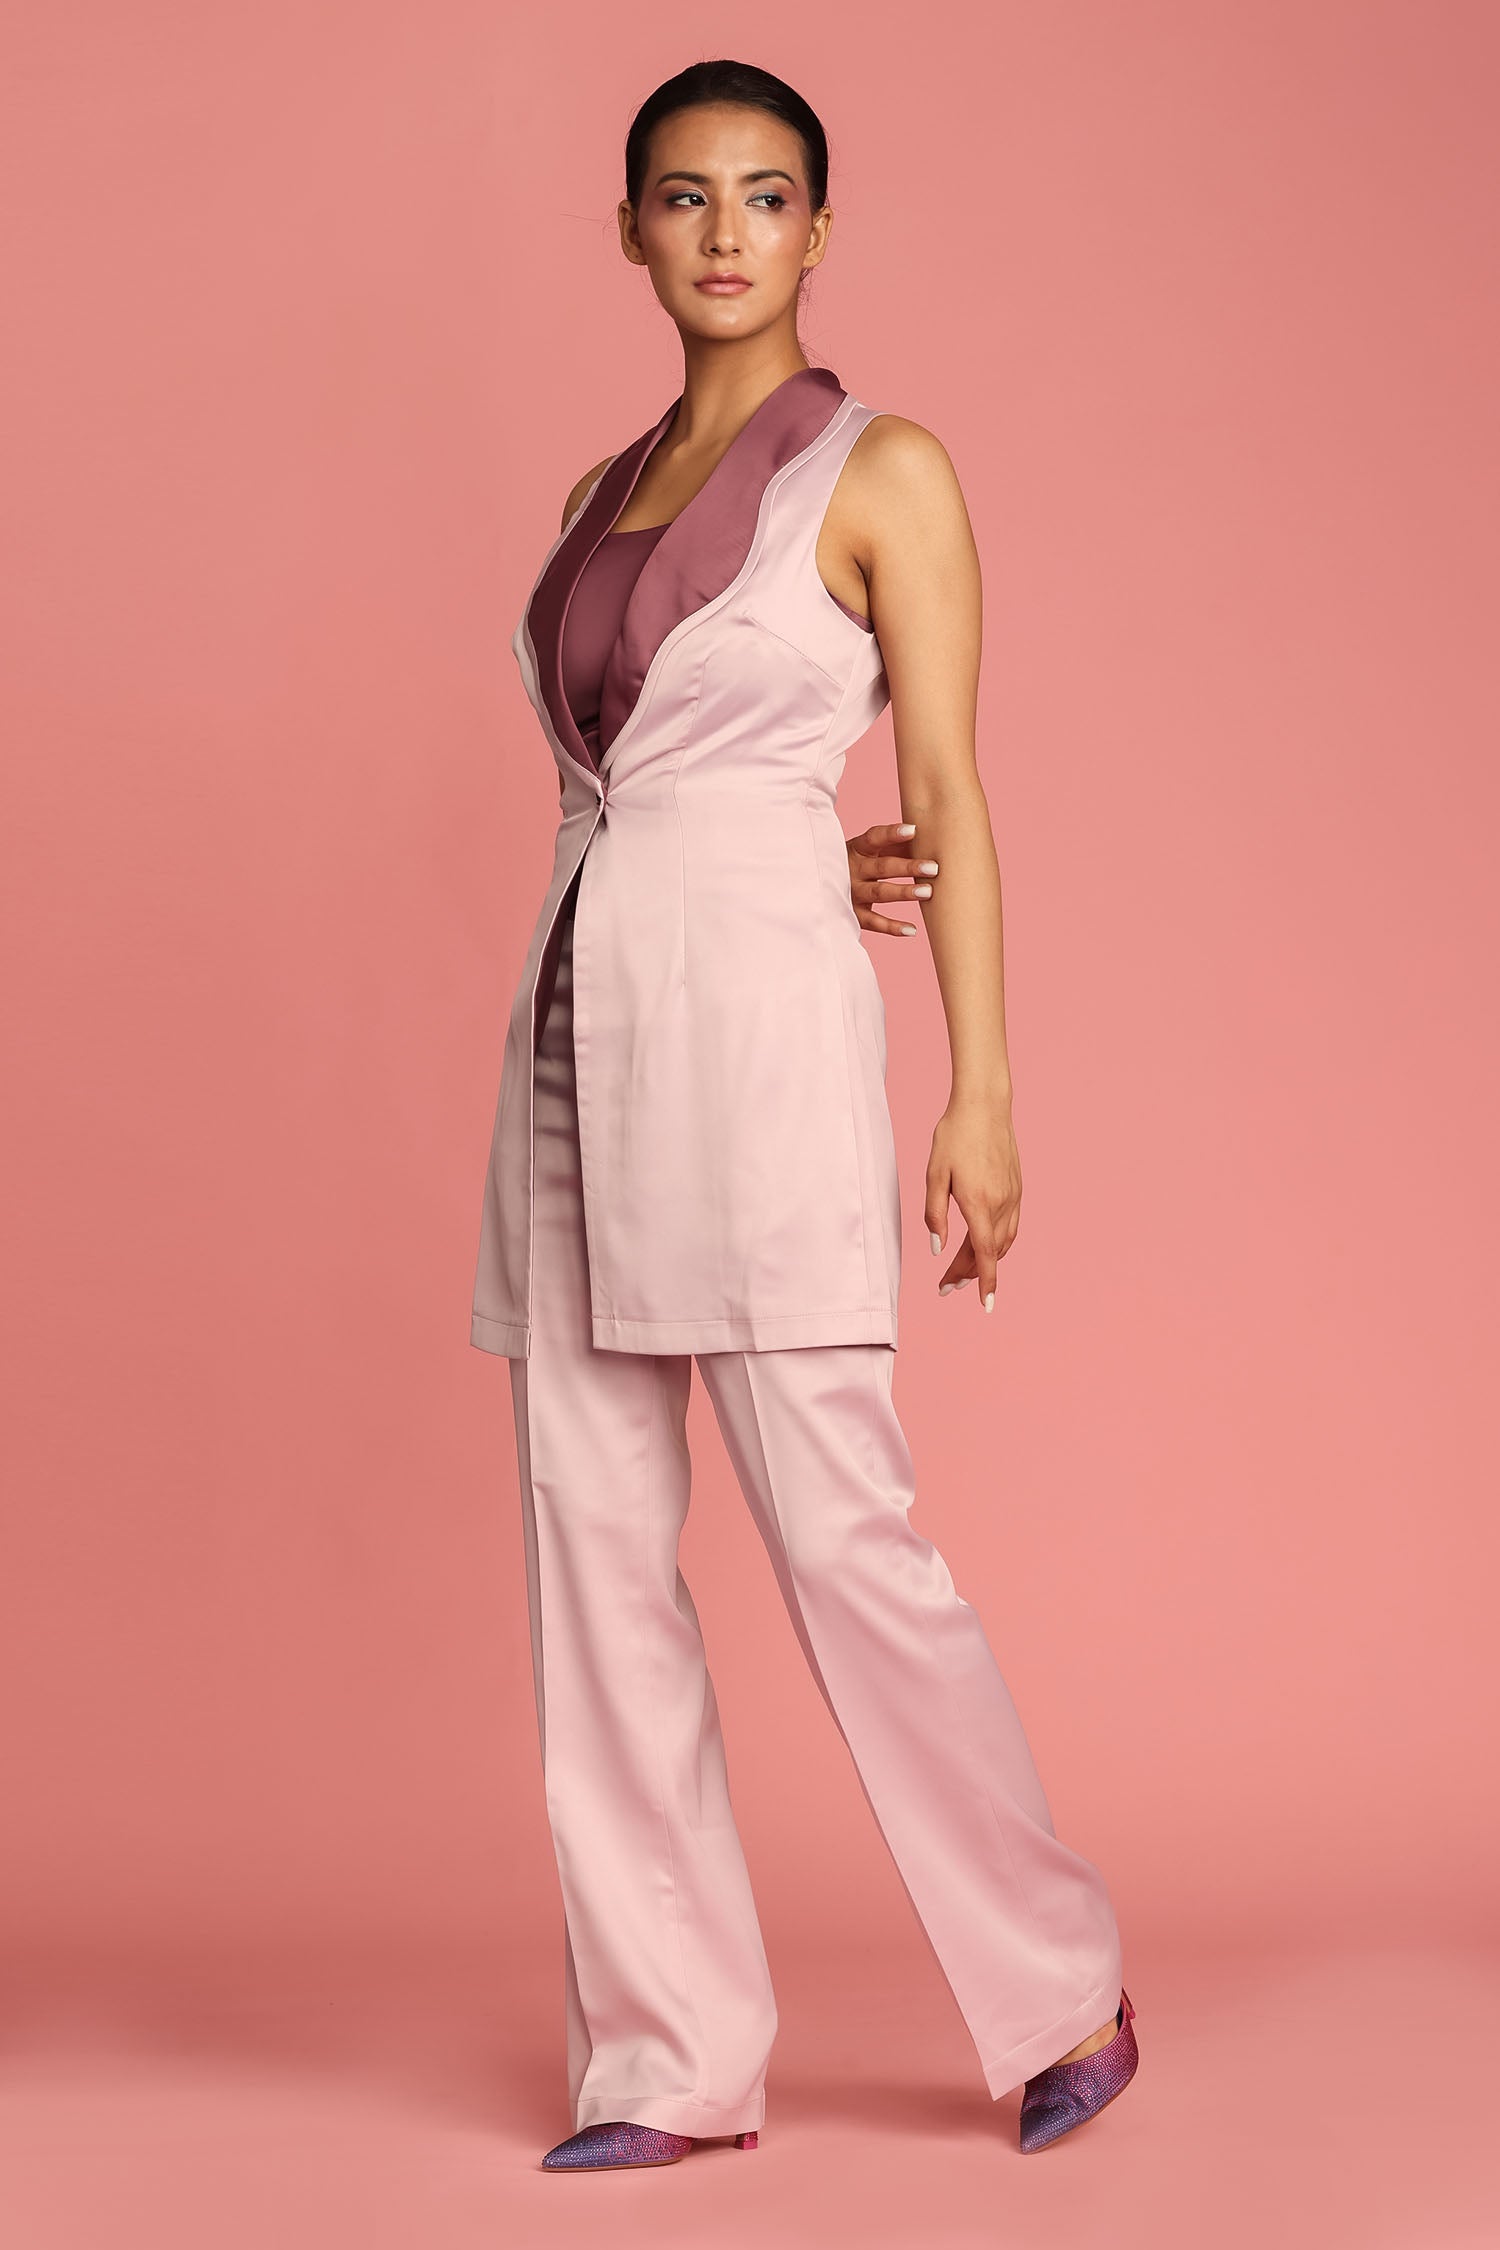 Bubble Gum Sleeveless Twilight Collar Blazer with Crop Top and Flared Pants